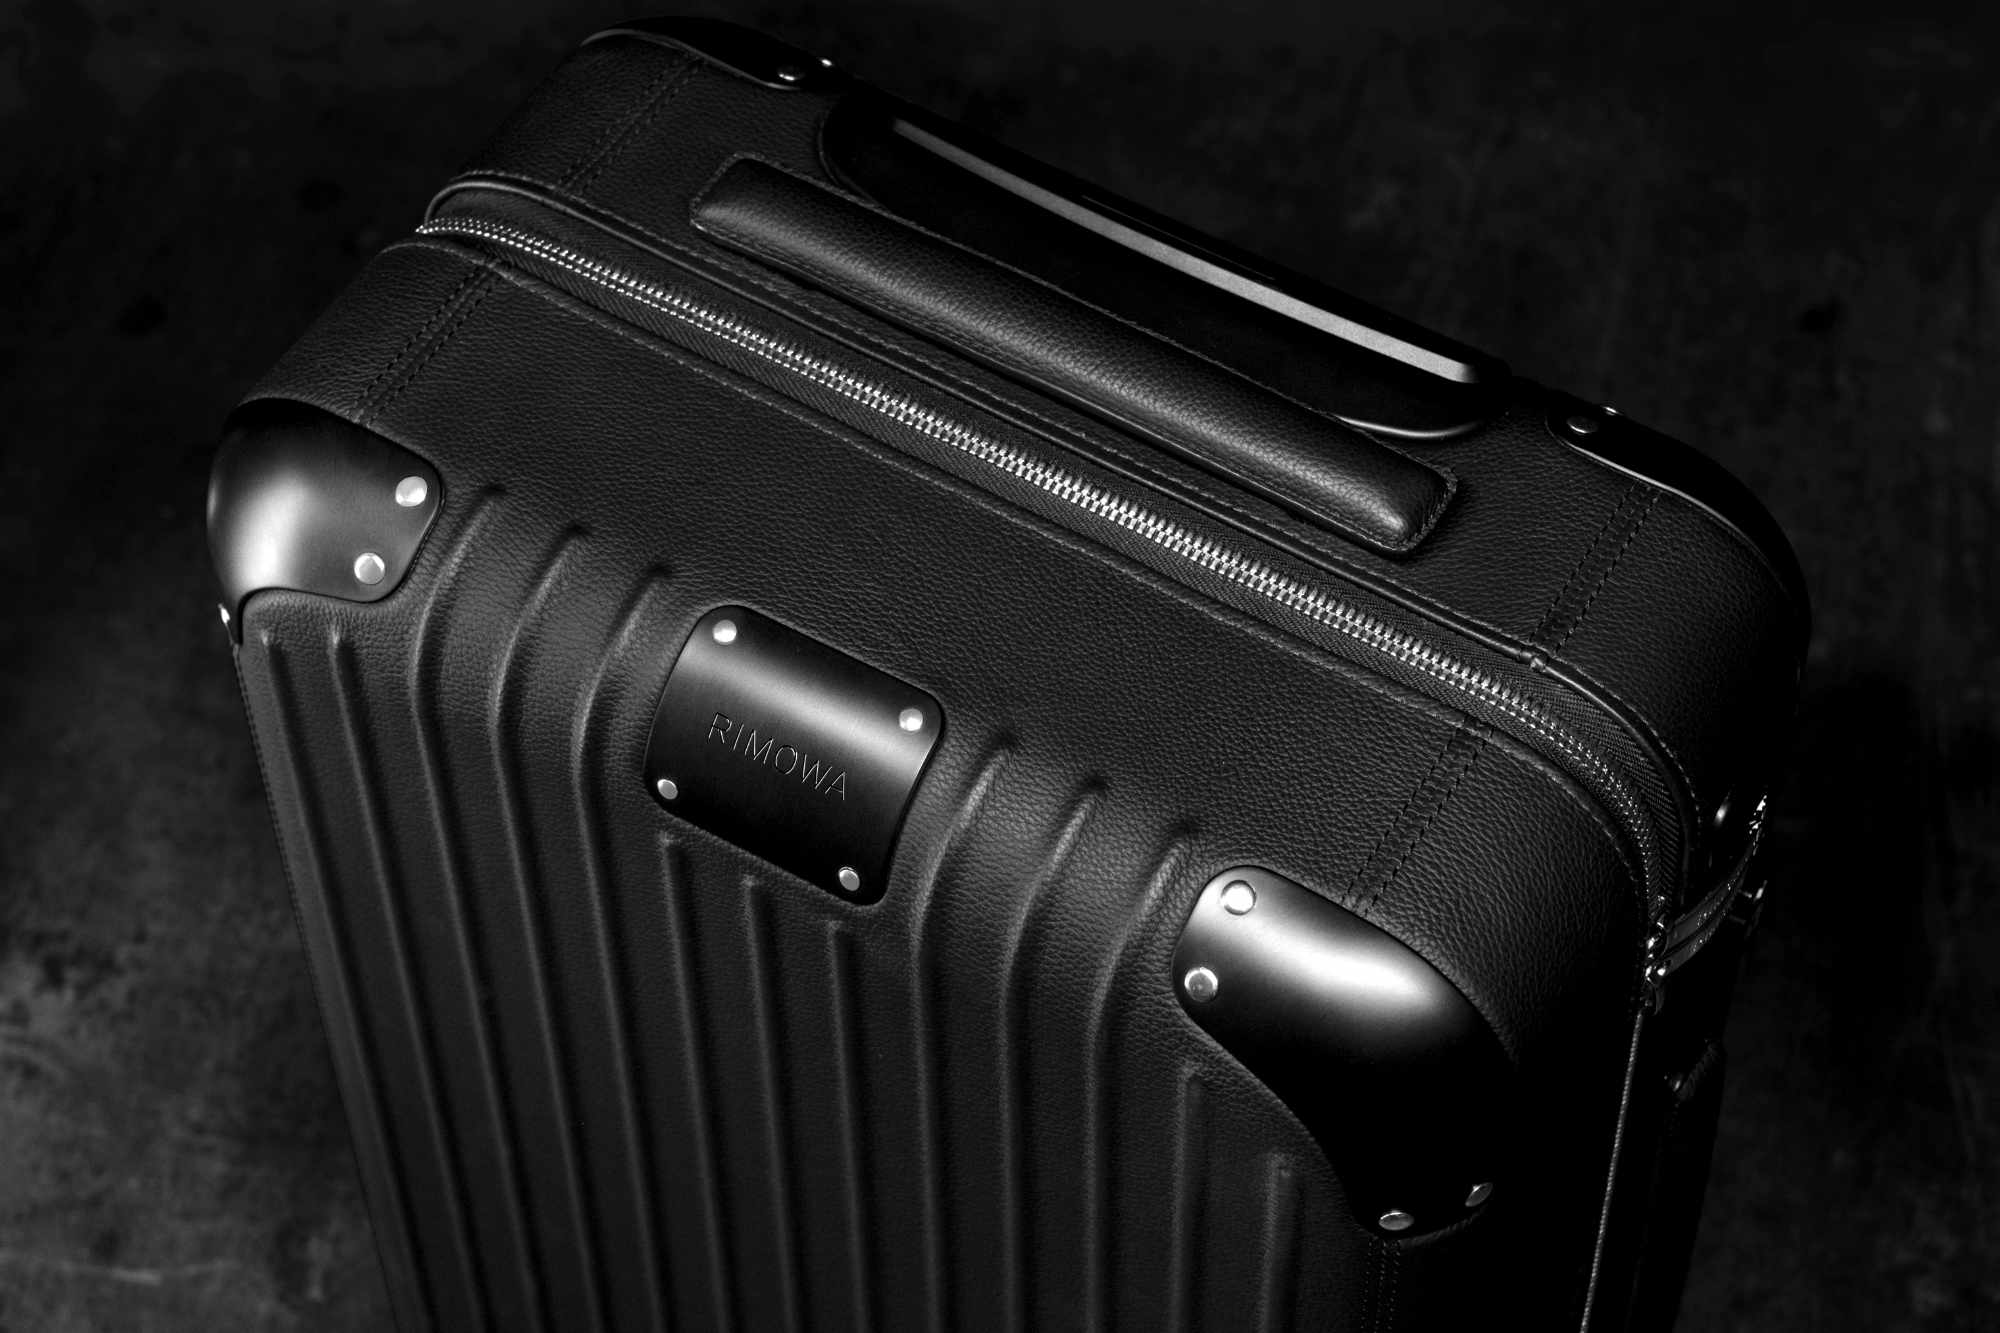 RIMOWA's $3,300 leather-wrapped Distinct Cabin suitcase collection